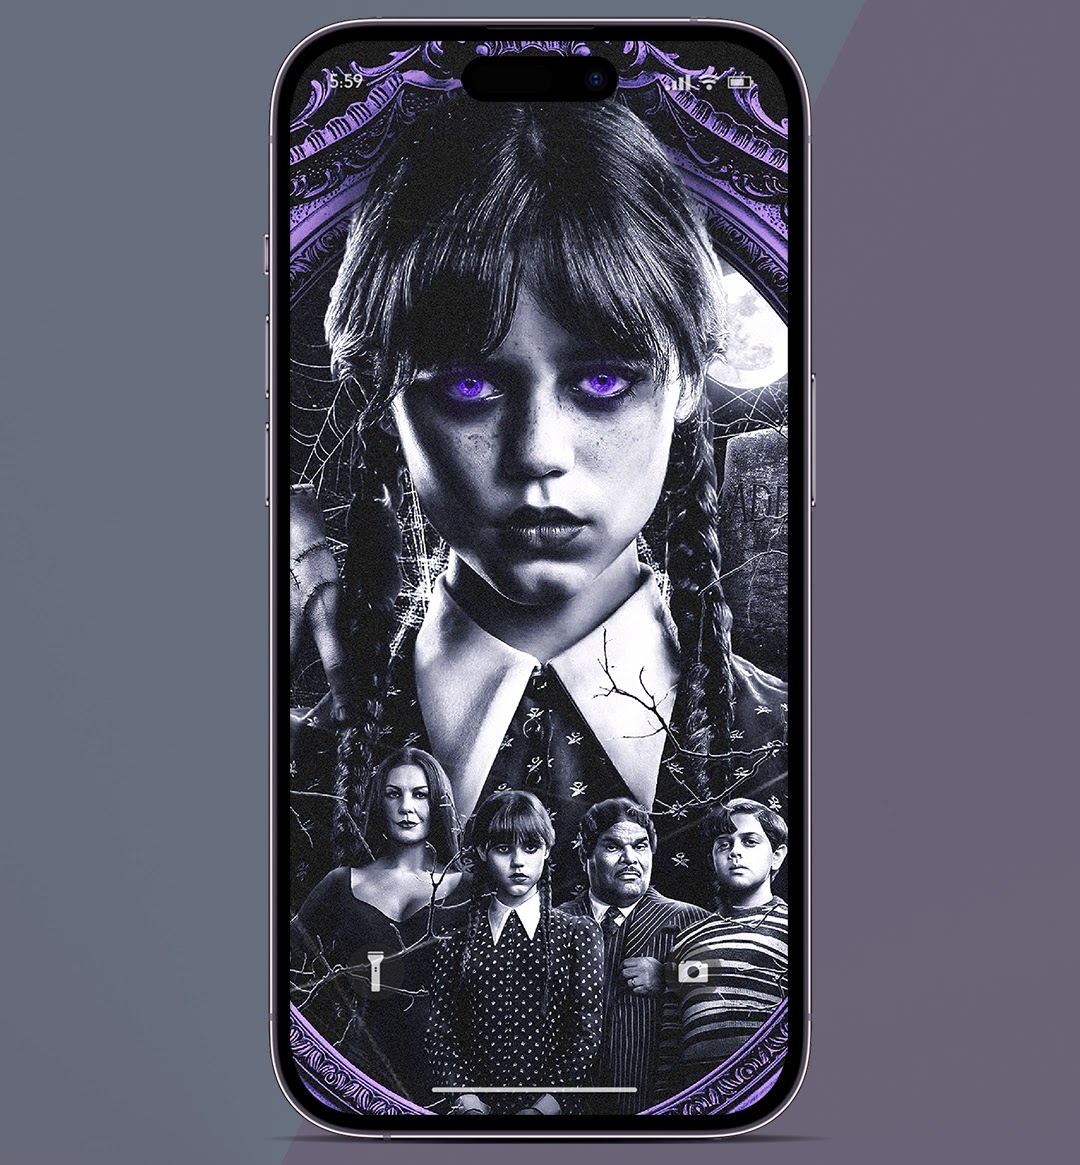 Wednesday Addams wallpaper for iPhone